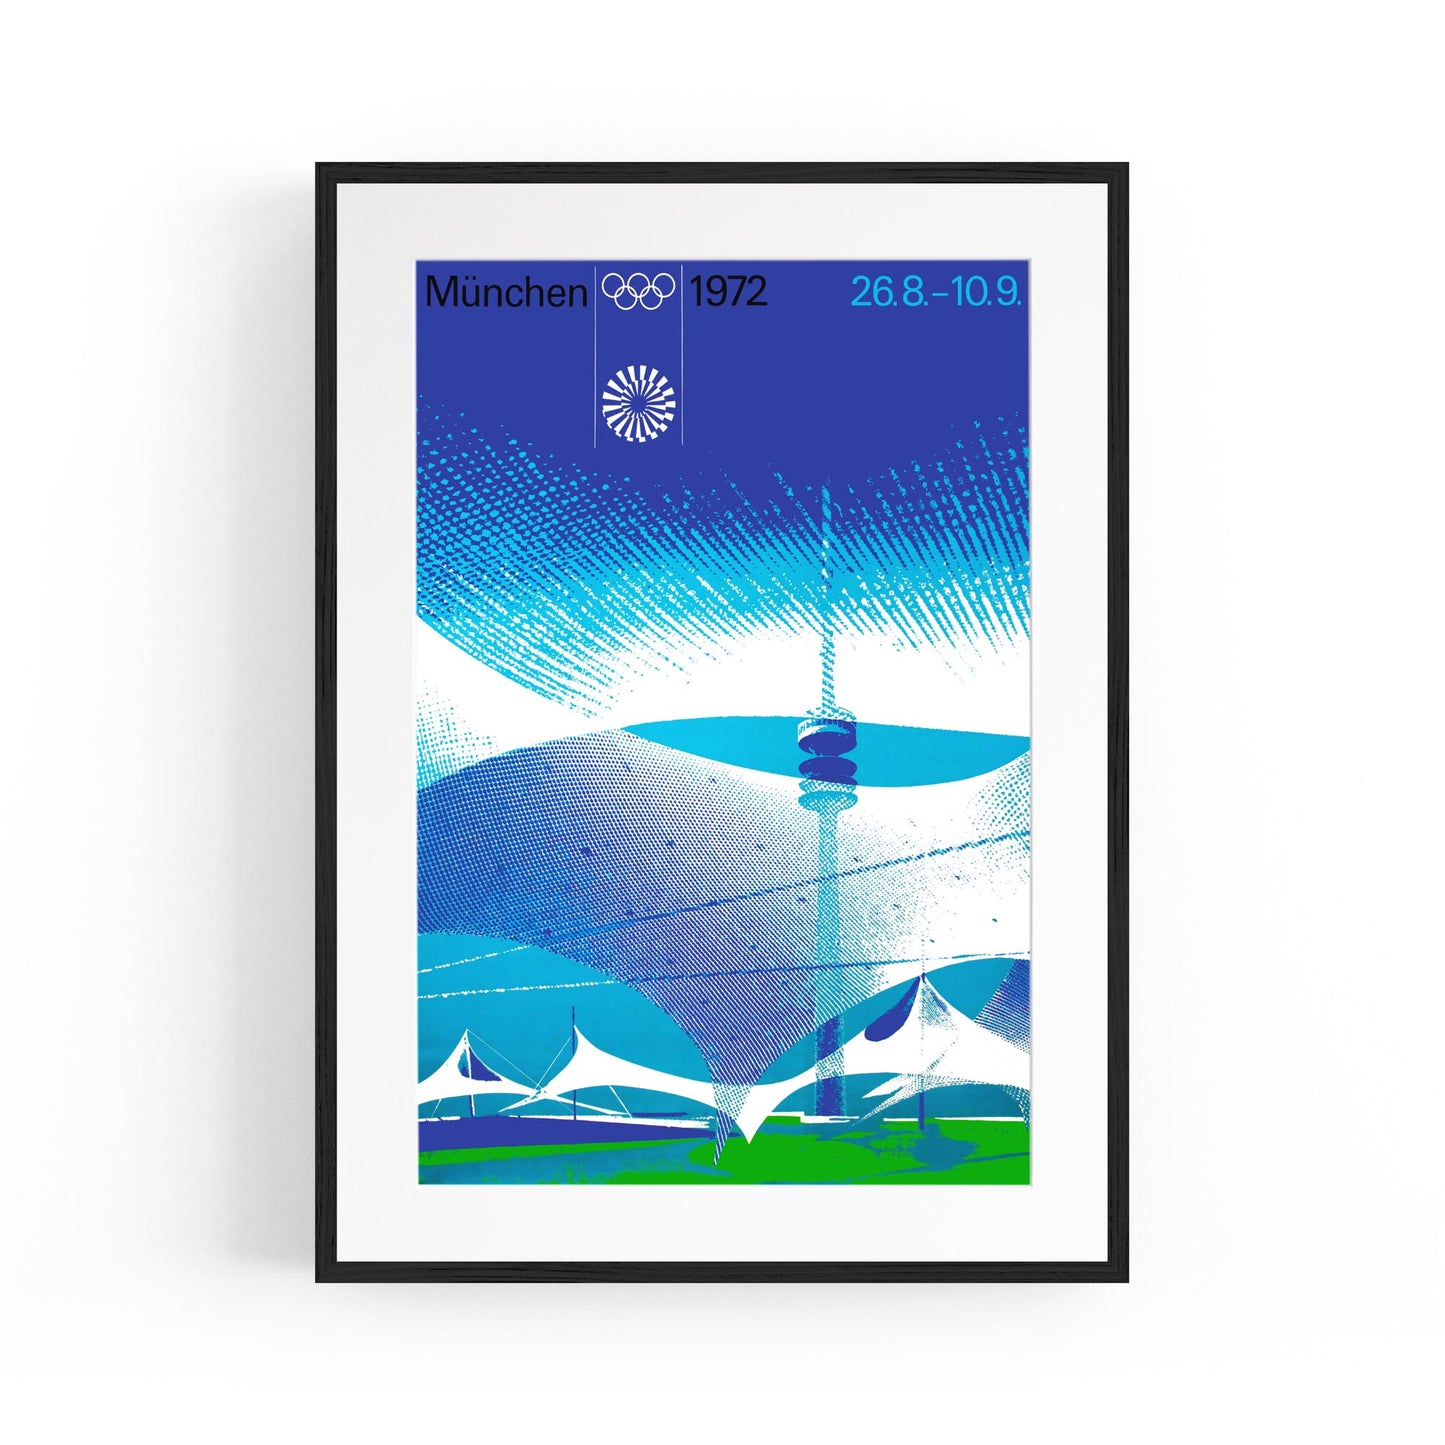 Munich, Germany "Munchen 1972 Olympic Games" by Otl Aicher | Framed Vintage Travel Poster